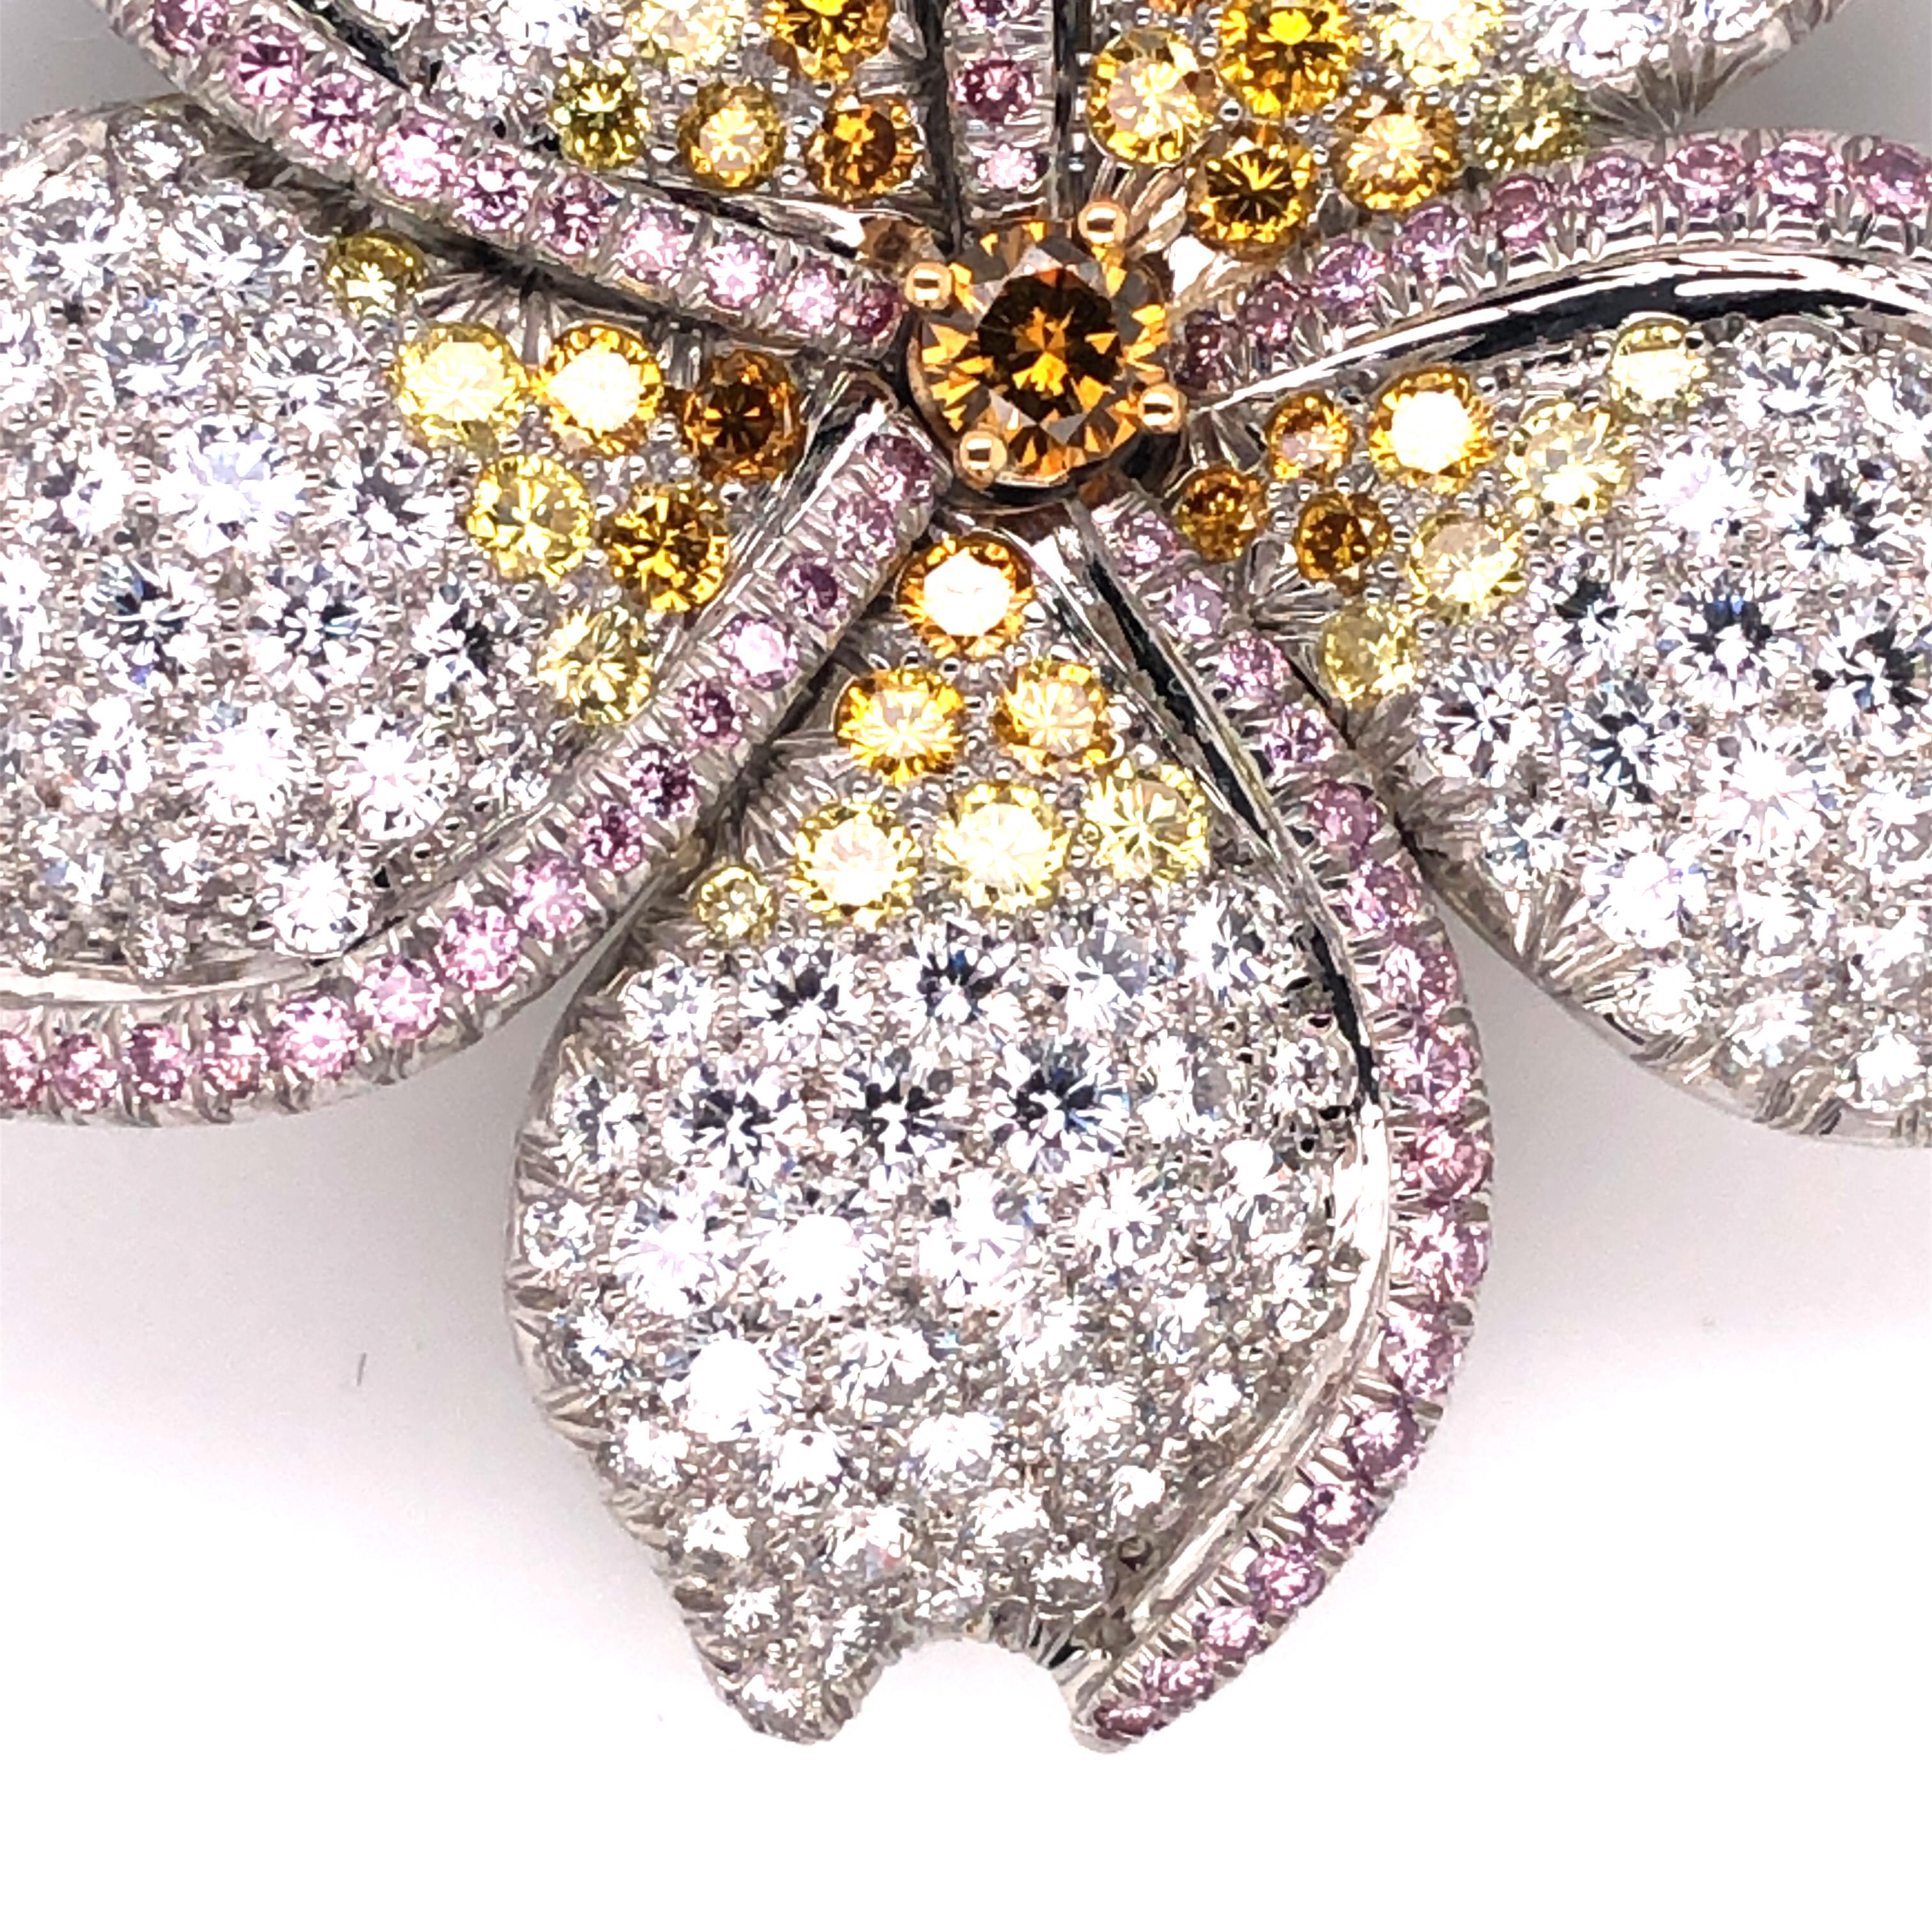 Oscar Heyman platinum and 18k yellow gold flower brooch contains 204 round diamonds (7.05tcw, F-G/VS+), 40 round fancy yellow diamonds (1.75tcw), 95 fancy pink diamonds (1.21tcw) and a fancy yellow diamond center weighing 0.27cts. It is stamped with